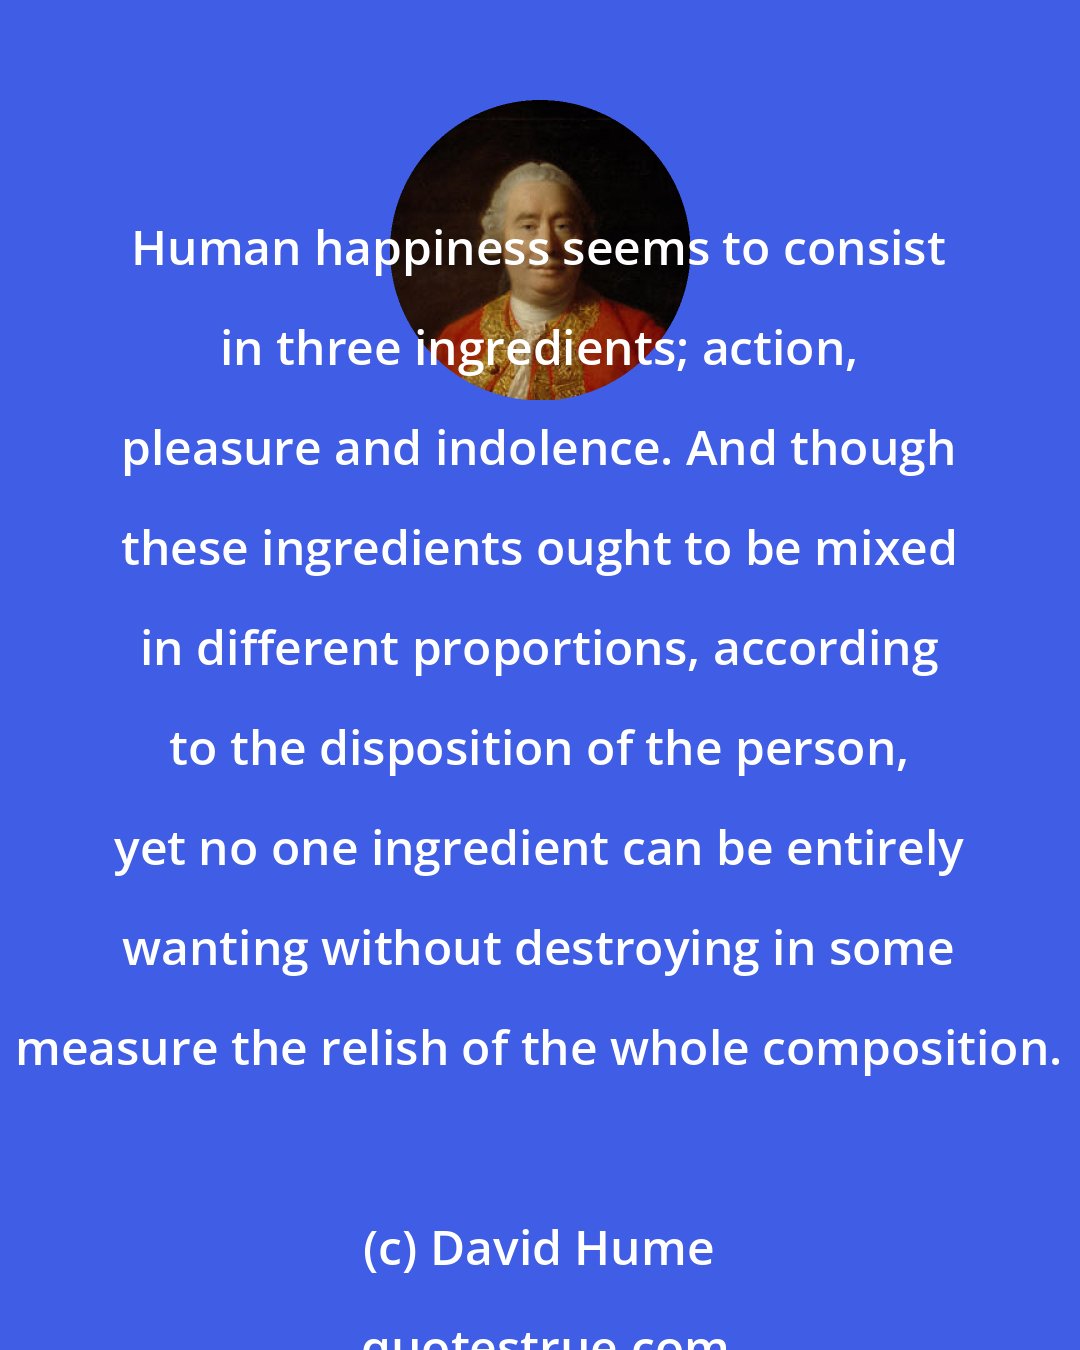 David Hume: Human happiness seems to consist in three ingredients; action, pleasure and indolence. And though these ingredients ought to be mixed in different proportions, according to the disposition of the person, yet no one ingredient can be entirely wanting without destroying in some measure the relish of the whole composition.